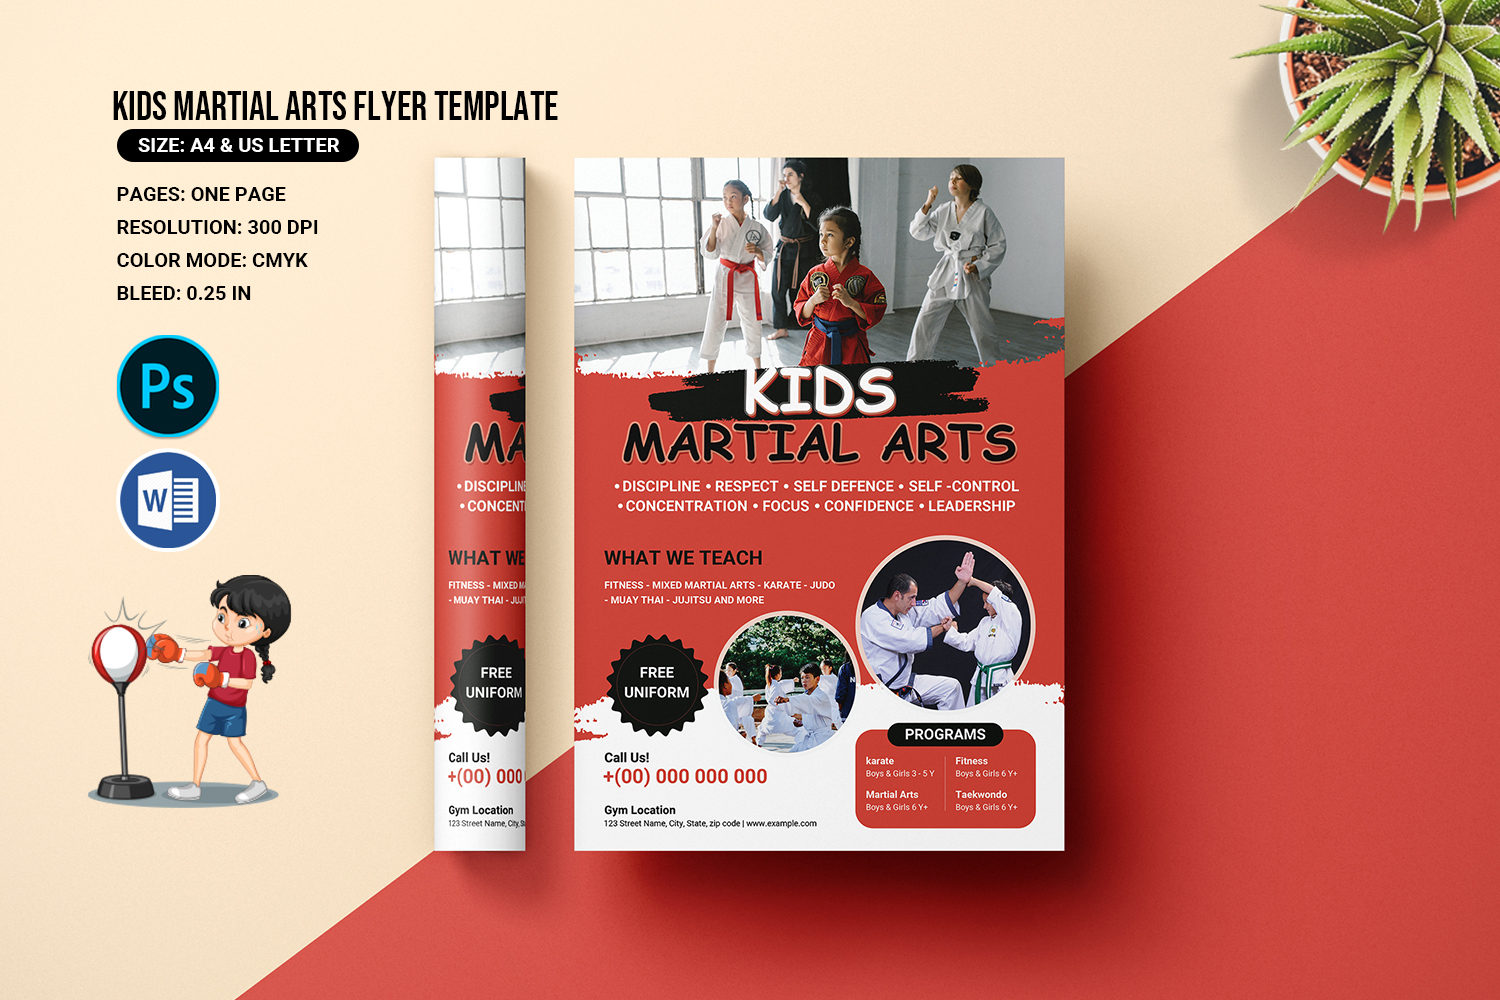 Kids Martial Arts Flyer Template. MS Word and Photoshop